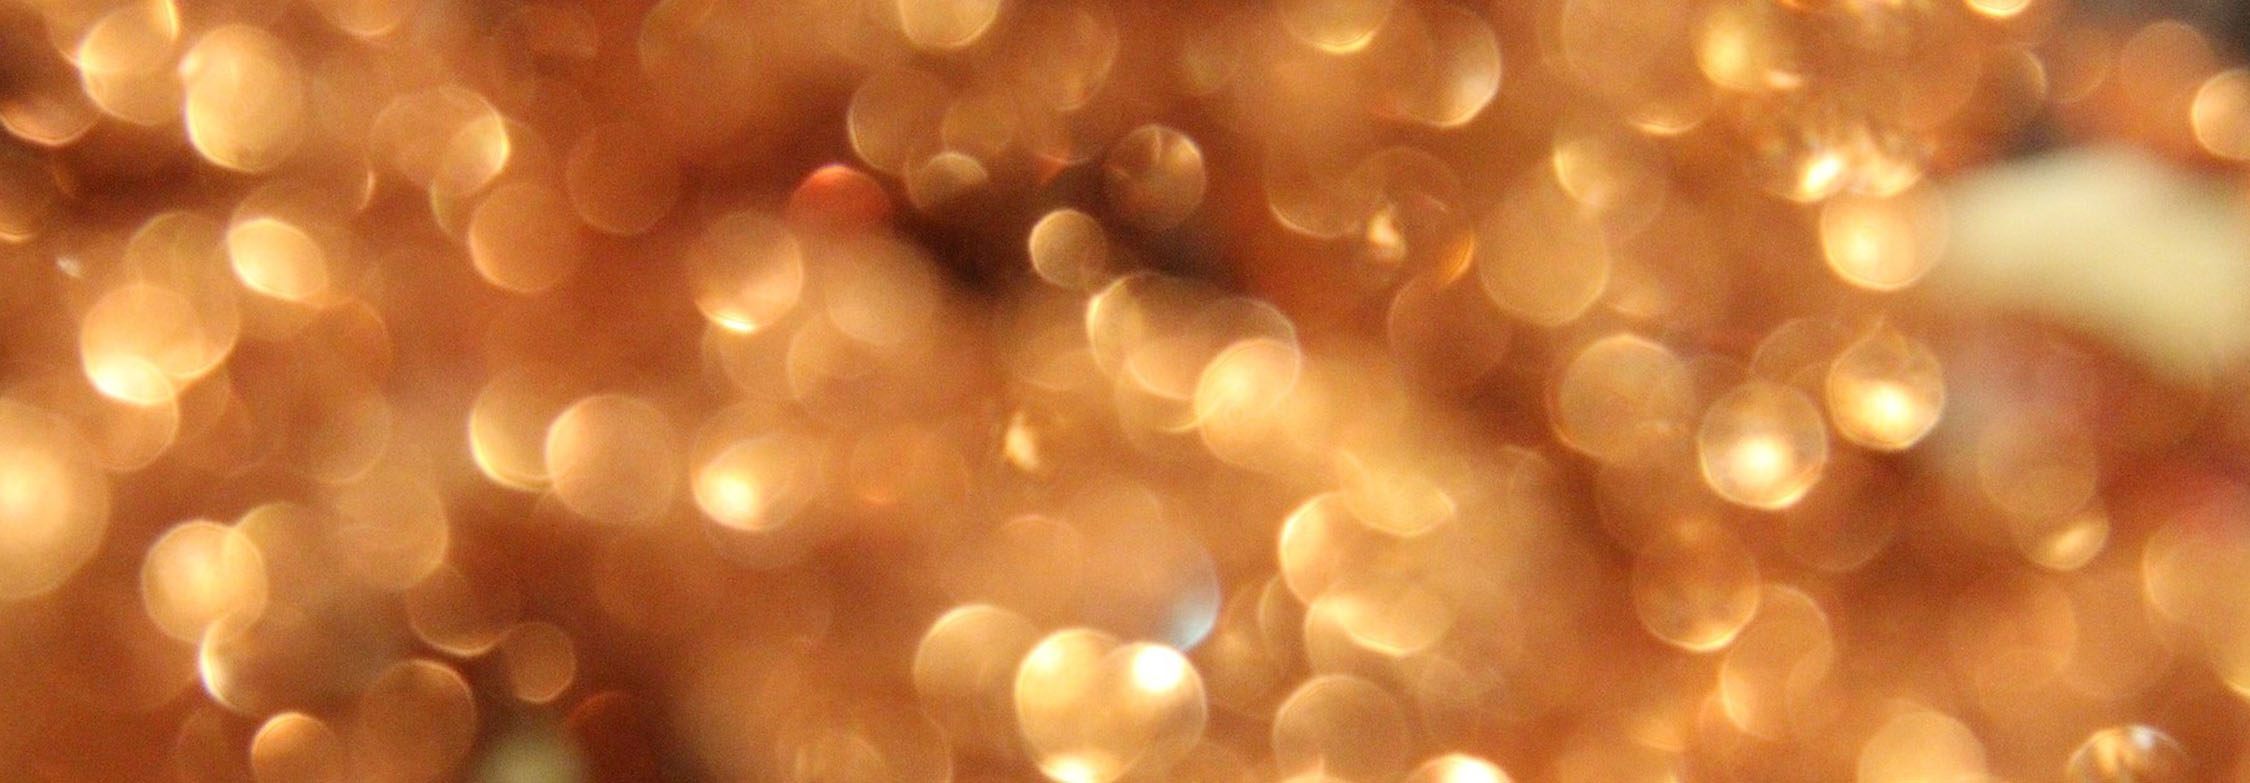 Golden background of glitter and light signifying restoration and rejuvenation in hospitality settings